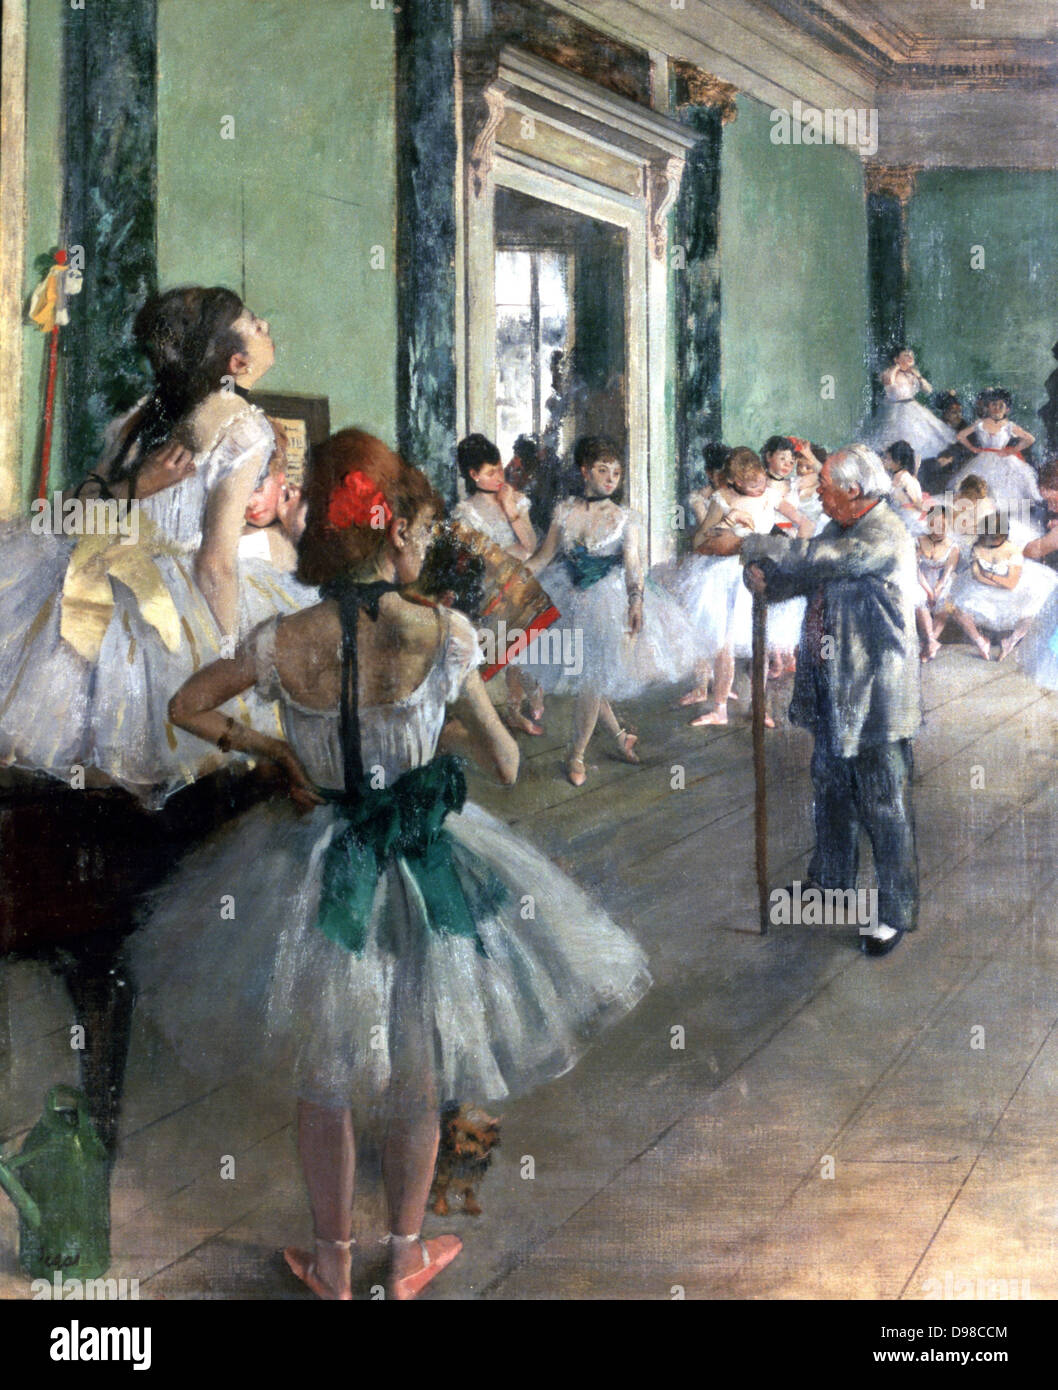 The Dance Class', 1874. Ballet dancers in tutus being tutored by the ballet master with his stick. Edgar Degas (1834-1917). French Impressionist painter. Stock Photo